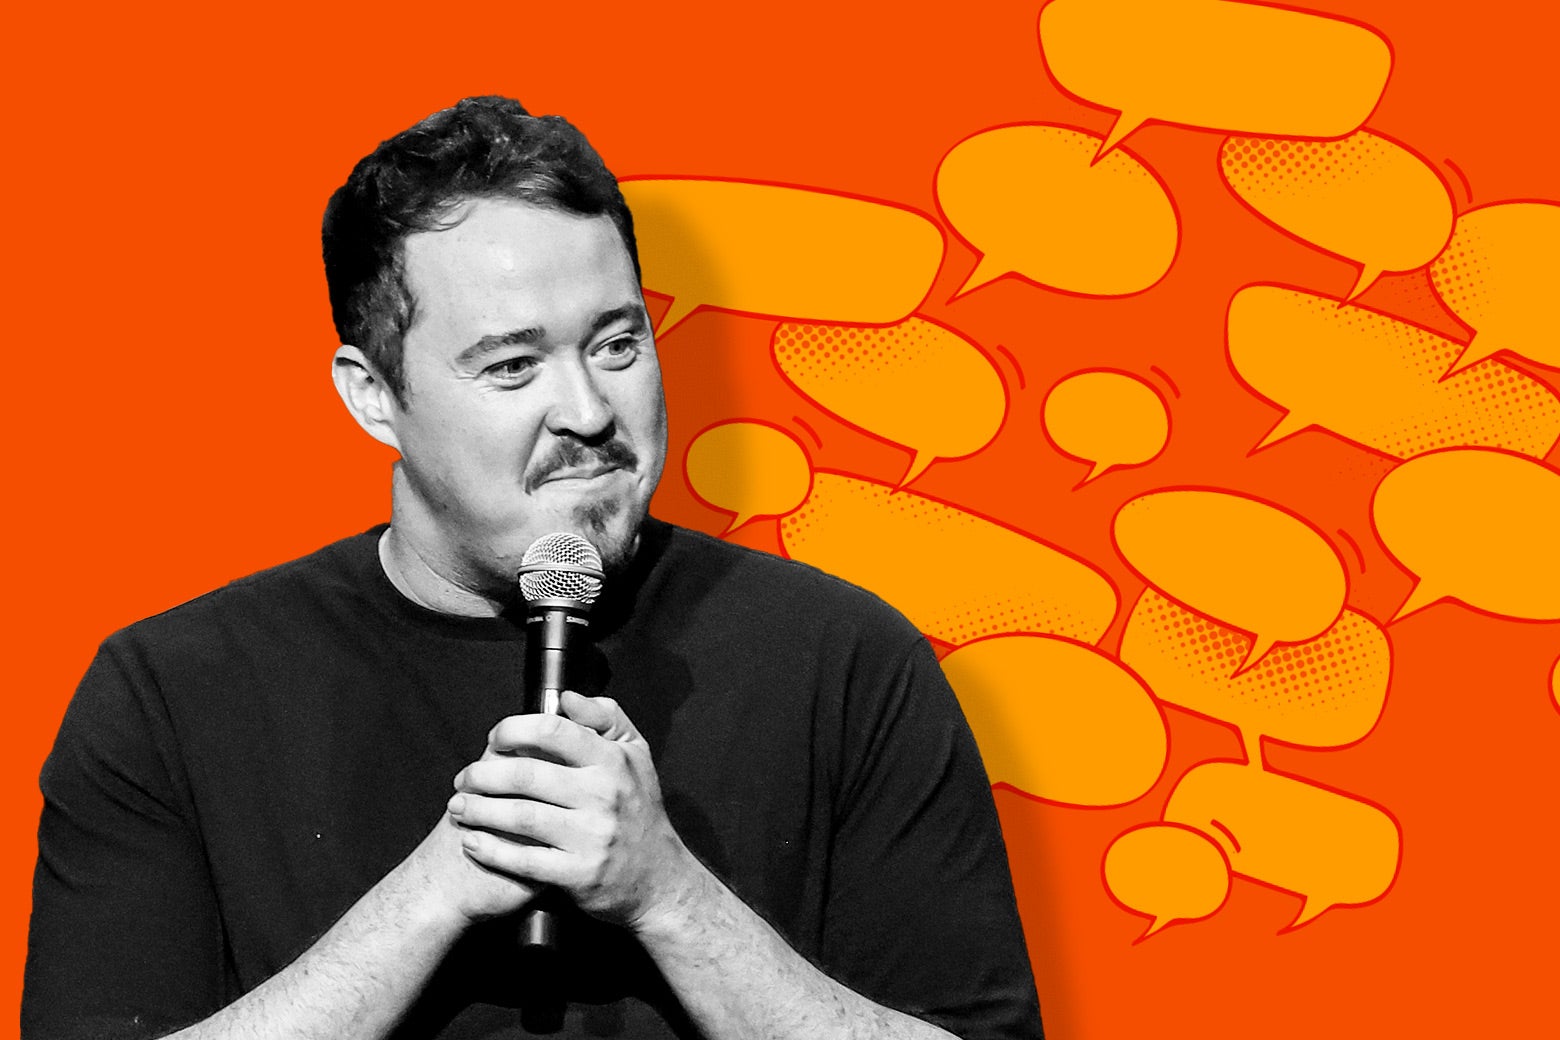 Shane Gillis in black and white, against an orange background with cartoon speech bubbles.